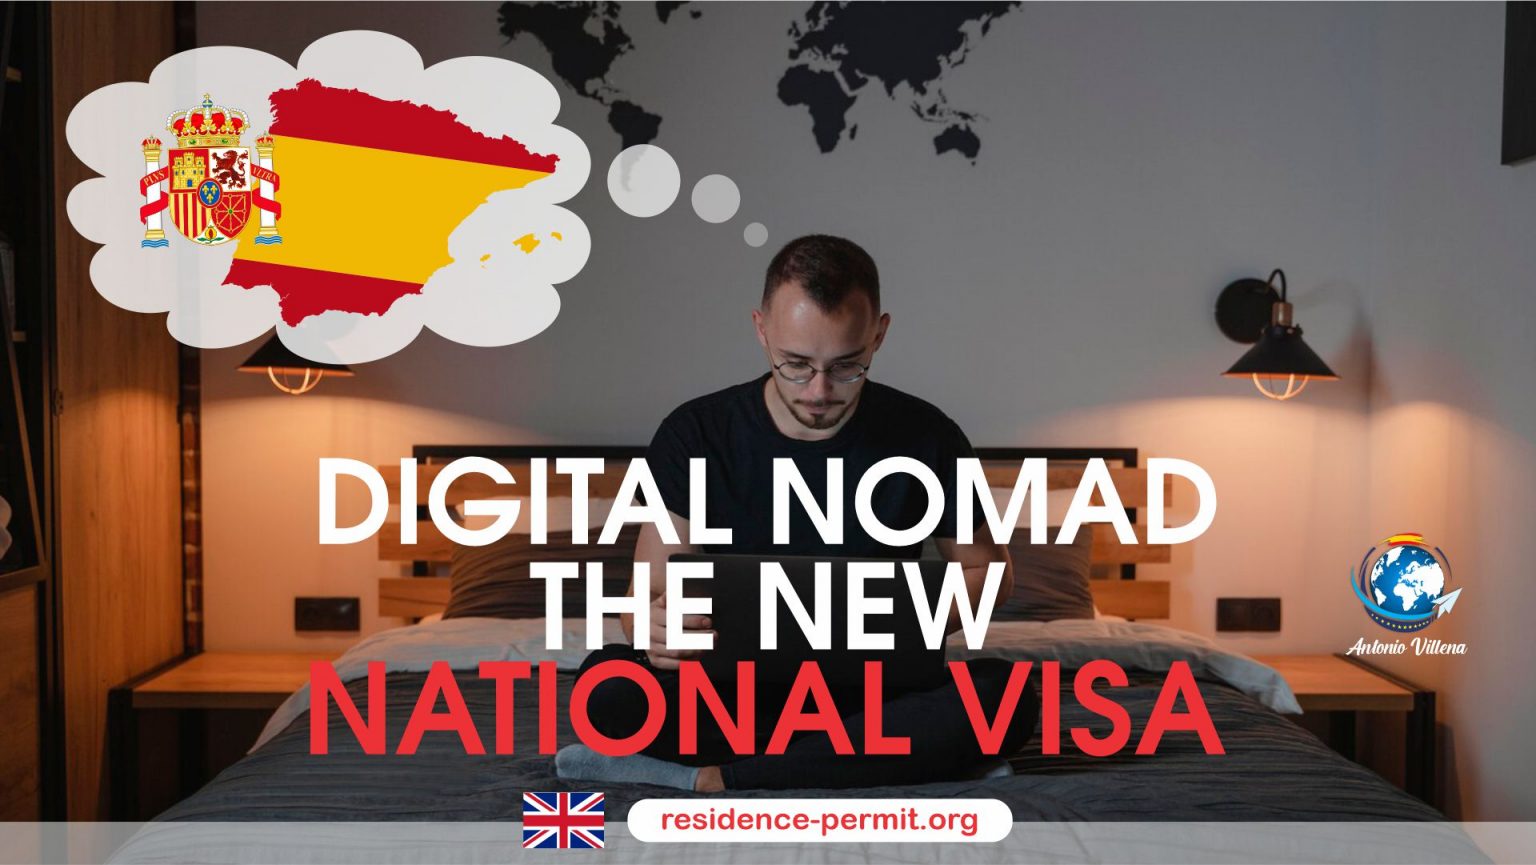 Find out about the new national digital nomad visa Residence Permit Immigration Procedures